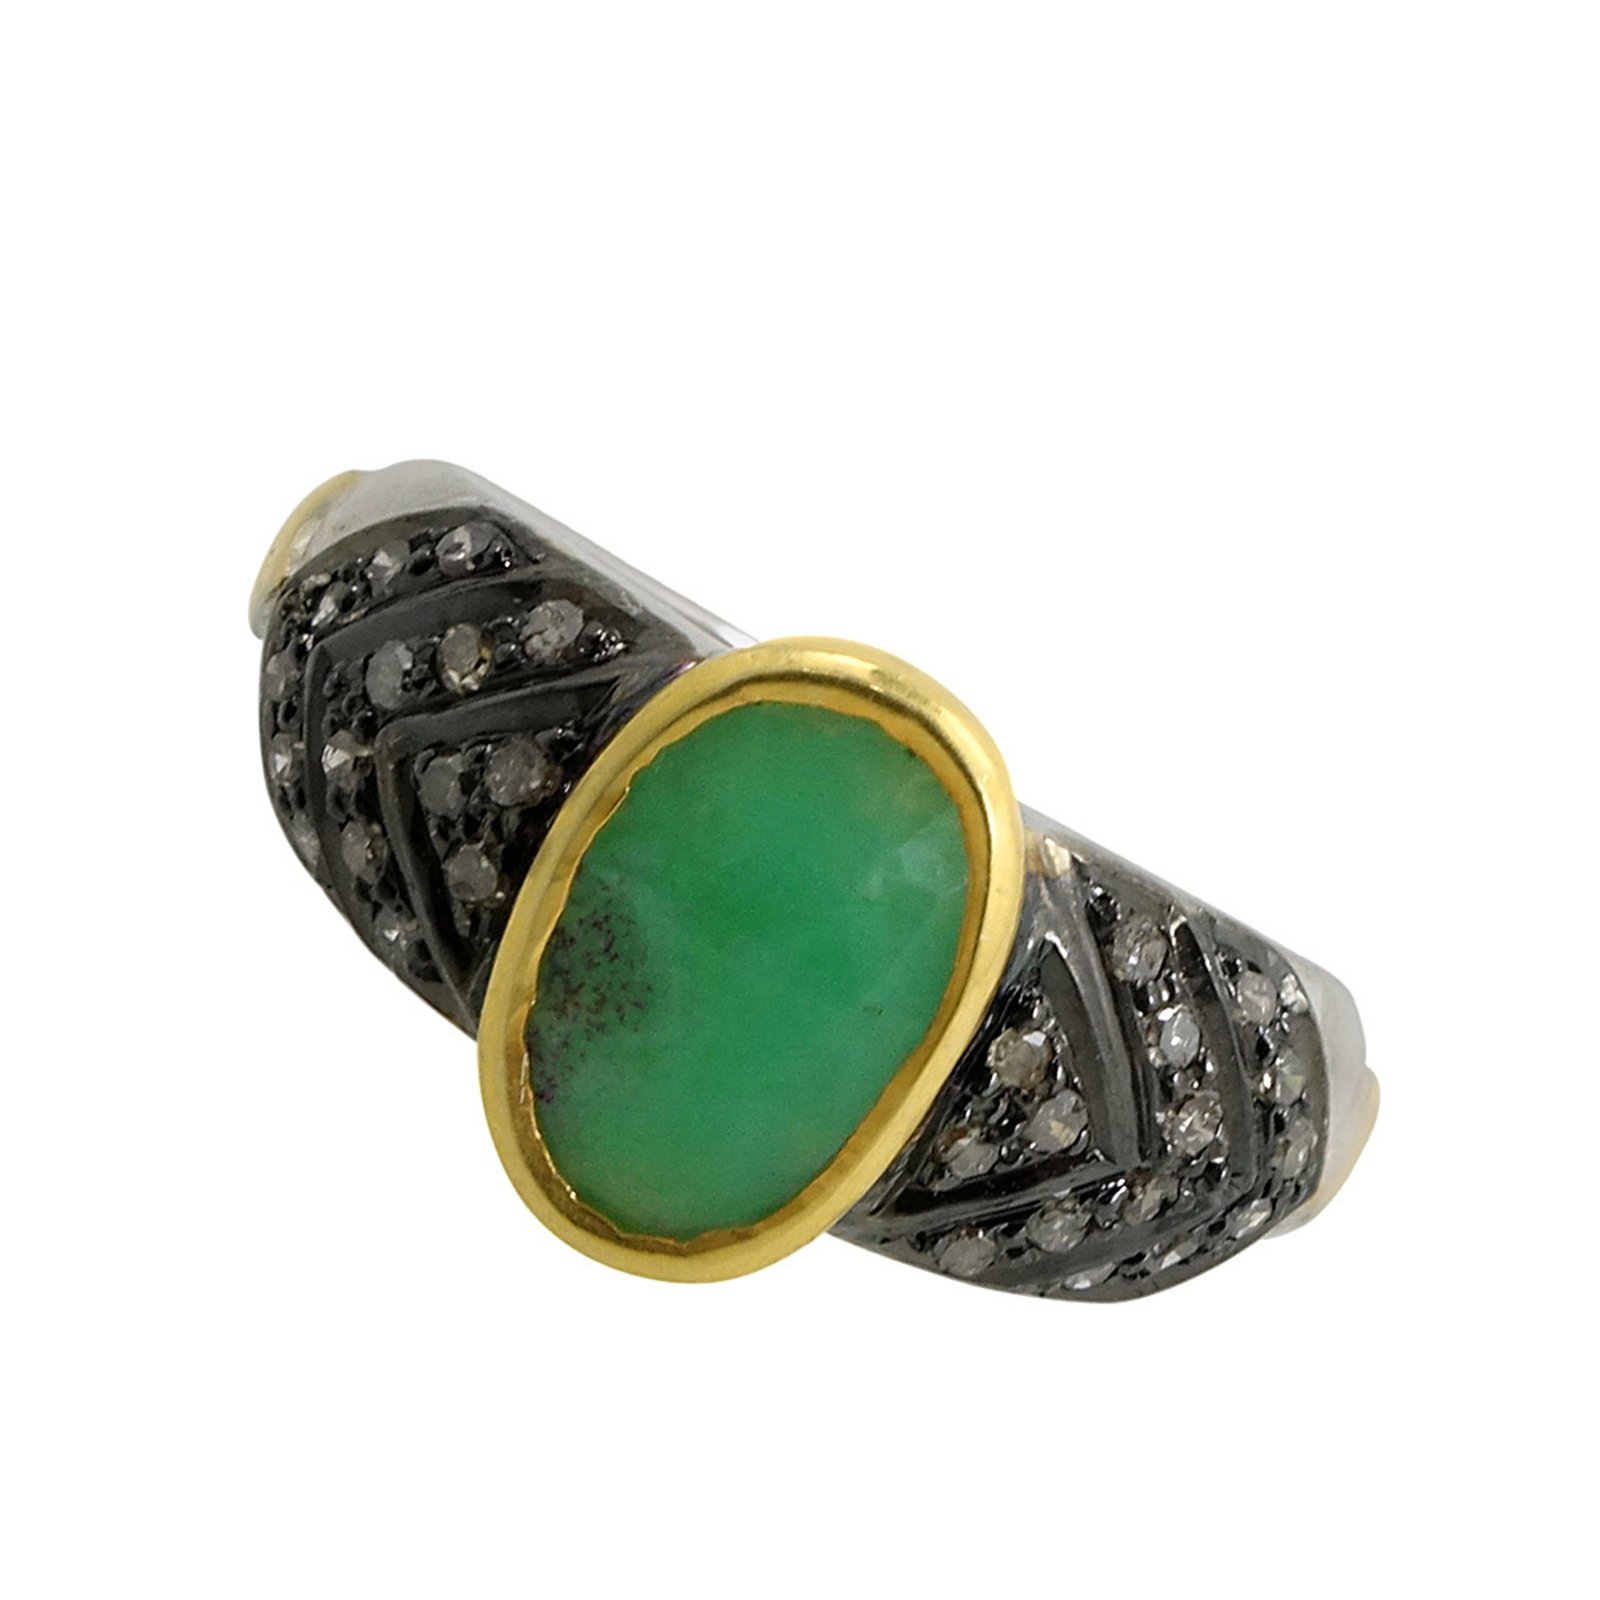 Solid gold & silver diamond ring with emerald